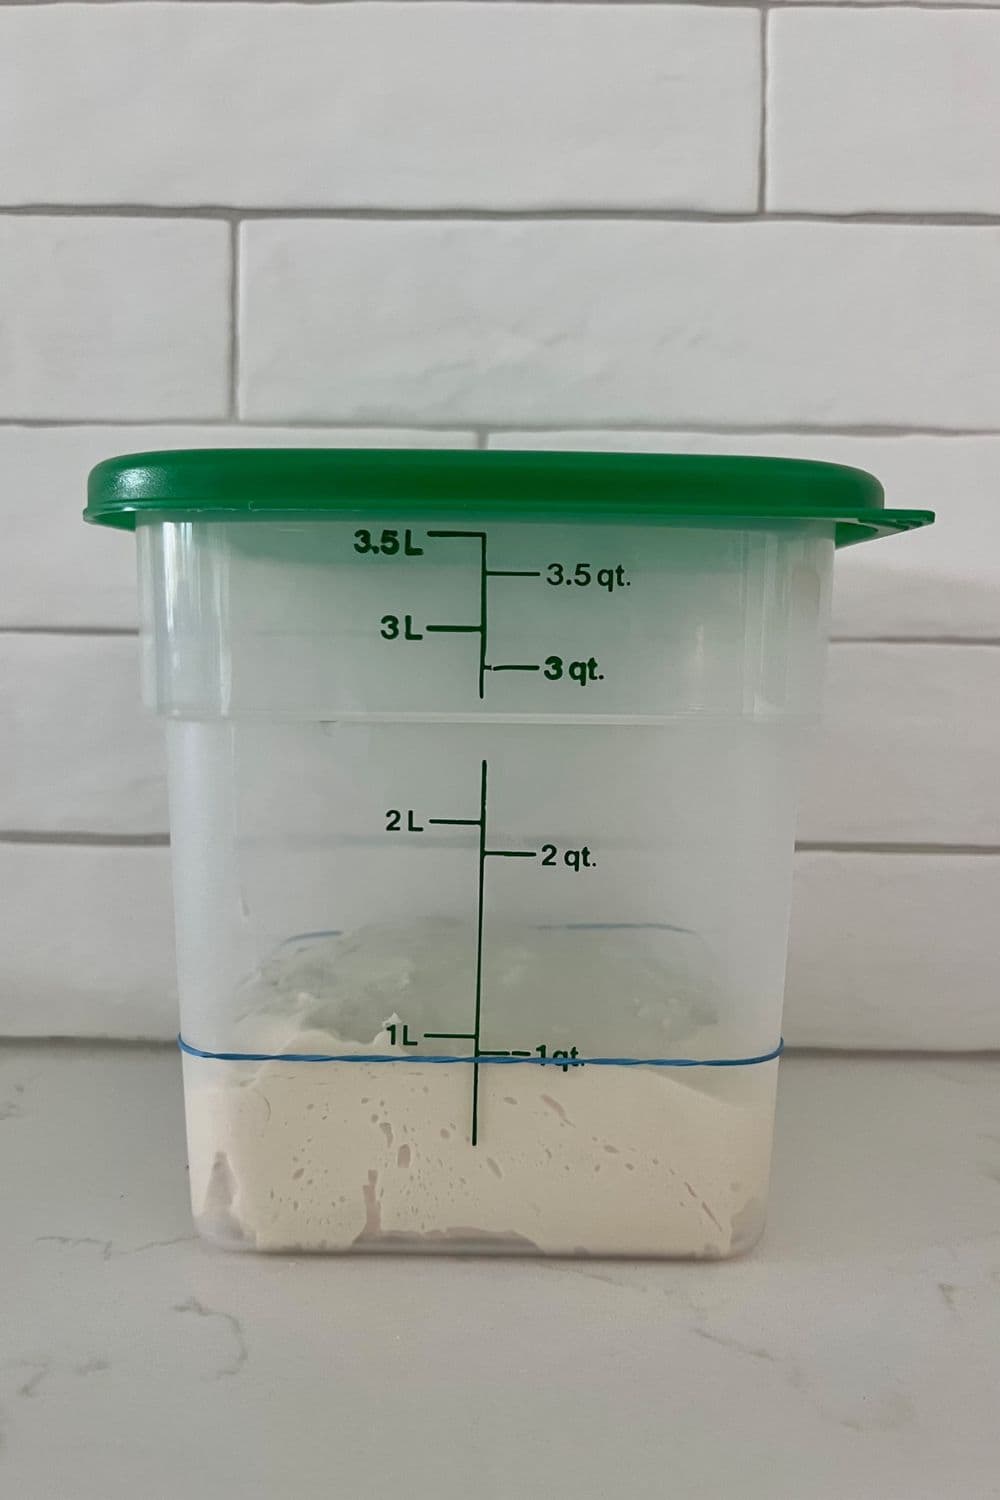 https://www.pantrymama.com/wp-content/uploads/2023/03/HOW-TO-USE-A-CAMBRO-CONTAINER-FOR-SOURDOUGH-BAKING-4-1.jpg